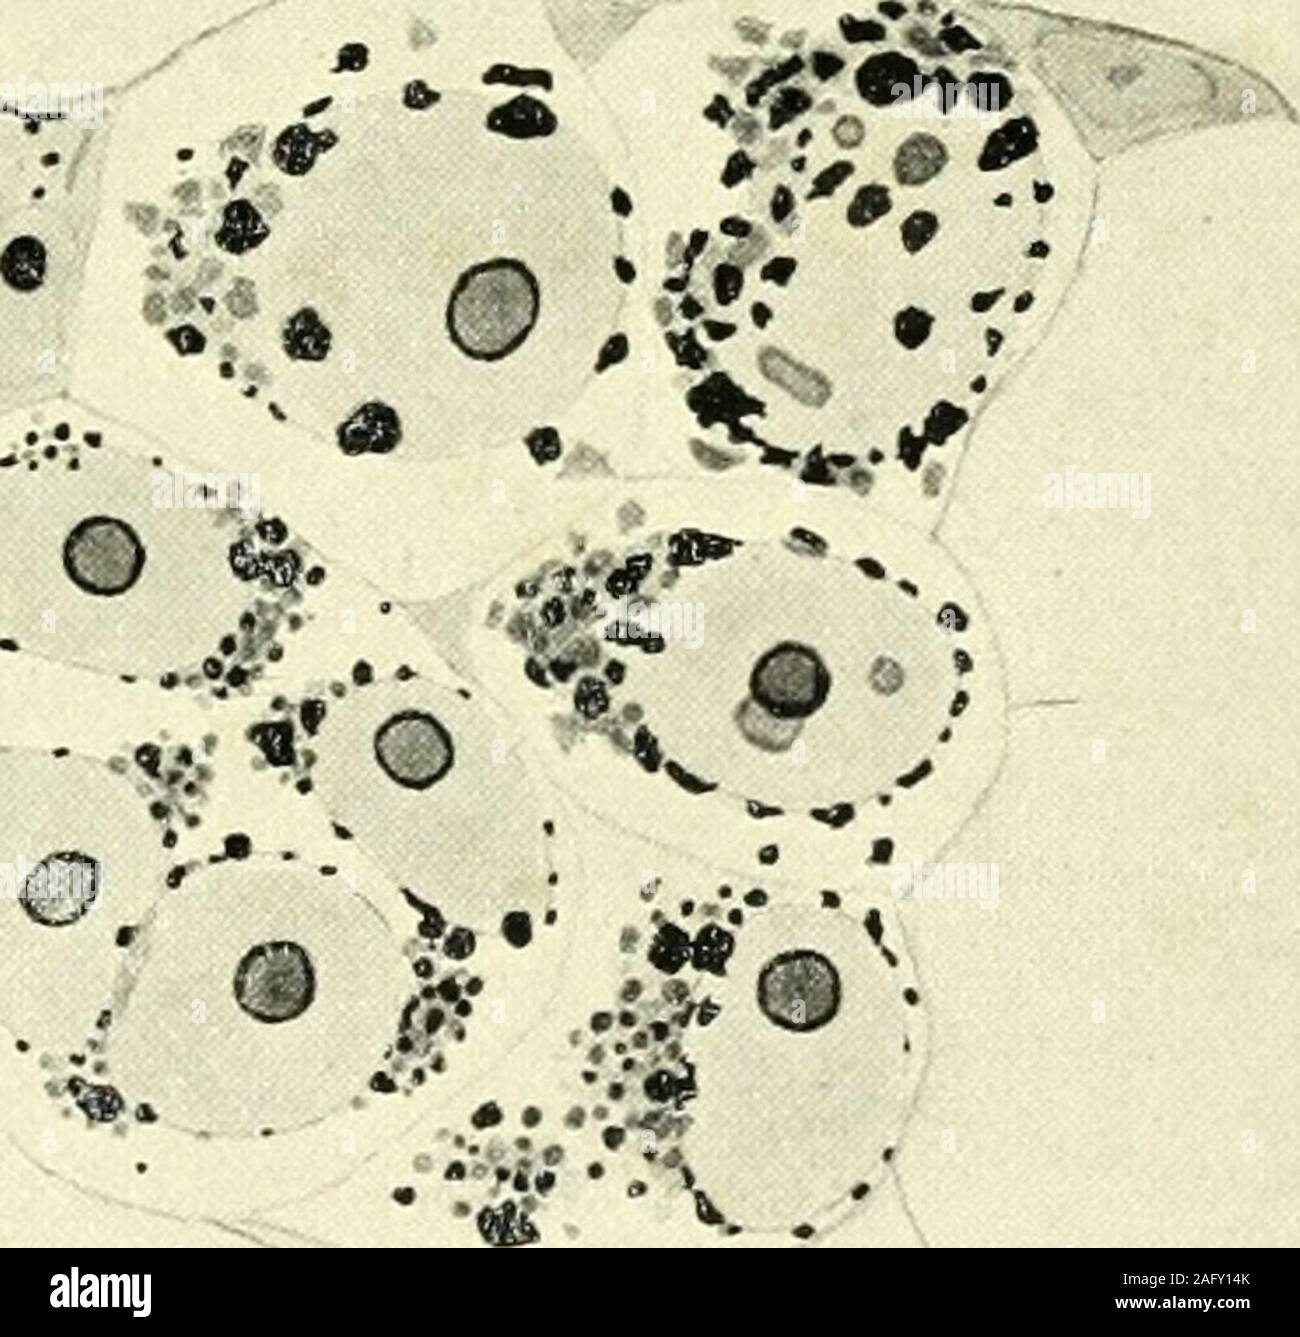 . The American journal of anatomy. 151 PLATE 2 EXPLANATION OF FIGURES 4 and 5 Fundulus heteroclitus. Fixation: Benda. Stain: Benda. Meta-phase and anaphase of the mitotic division of primary spermatogonia. 6 Same material. Tertiary spermatogonium. 7 Same material. Tertiary spermatogonium: metaphase. 8 Fundulus majalis. Fixation: Benda, without acetic acid. Stain: Benda.First spermatocyte. 9 and 10 Same material. ^Nletaphase and anaphase of first division ofmaturation. 11 Fundulus heteroclitus. Fixation: Regaud. Stain: acid fuchsin-methjd-green. Anaphase of first division of maturation. 12 Same Stock Photo